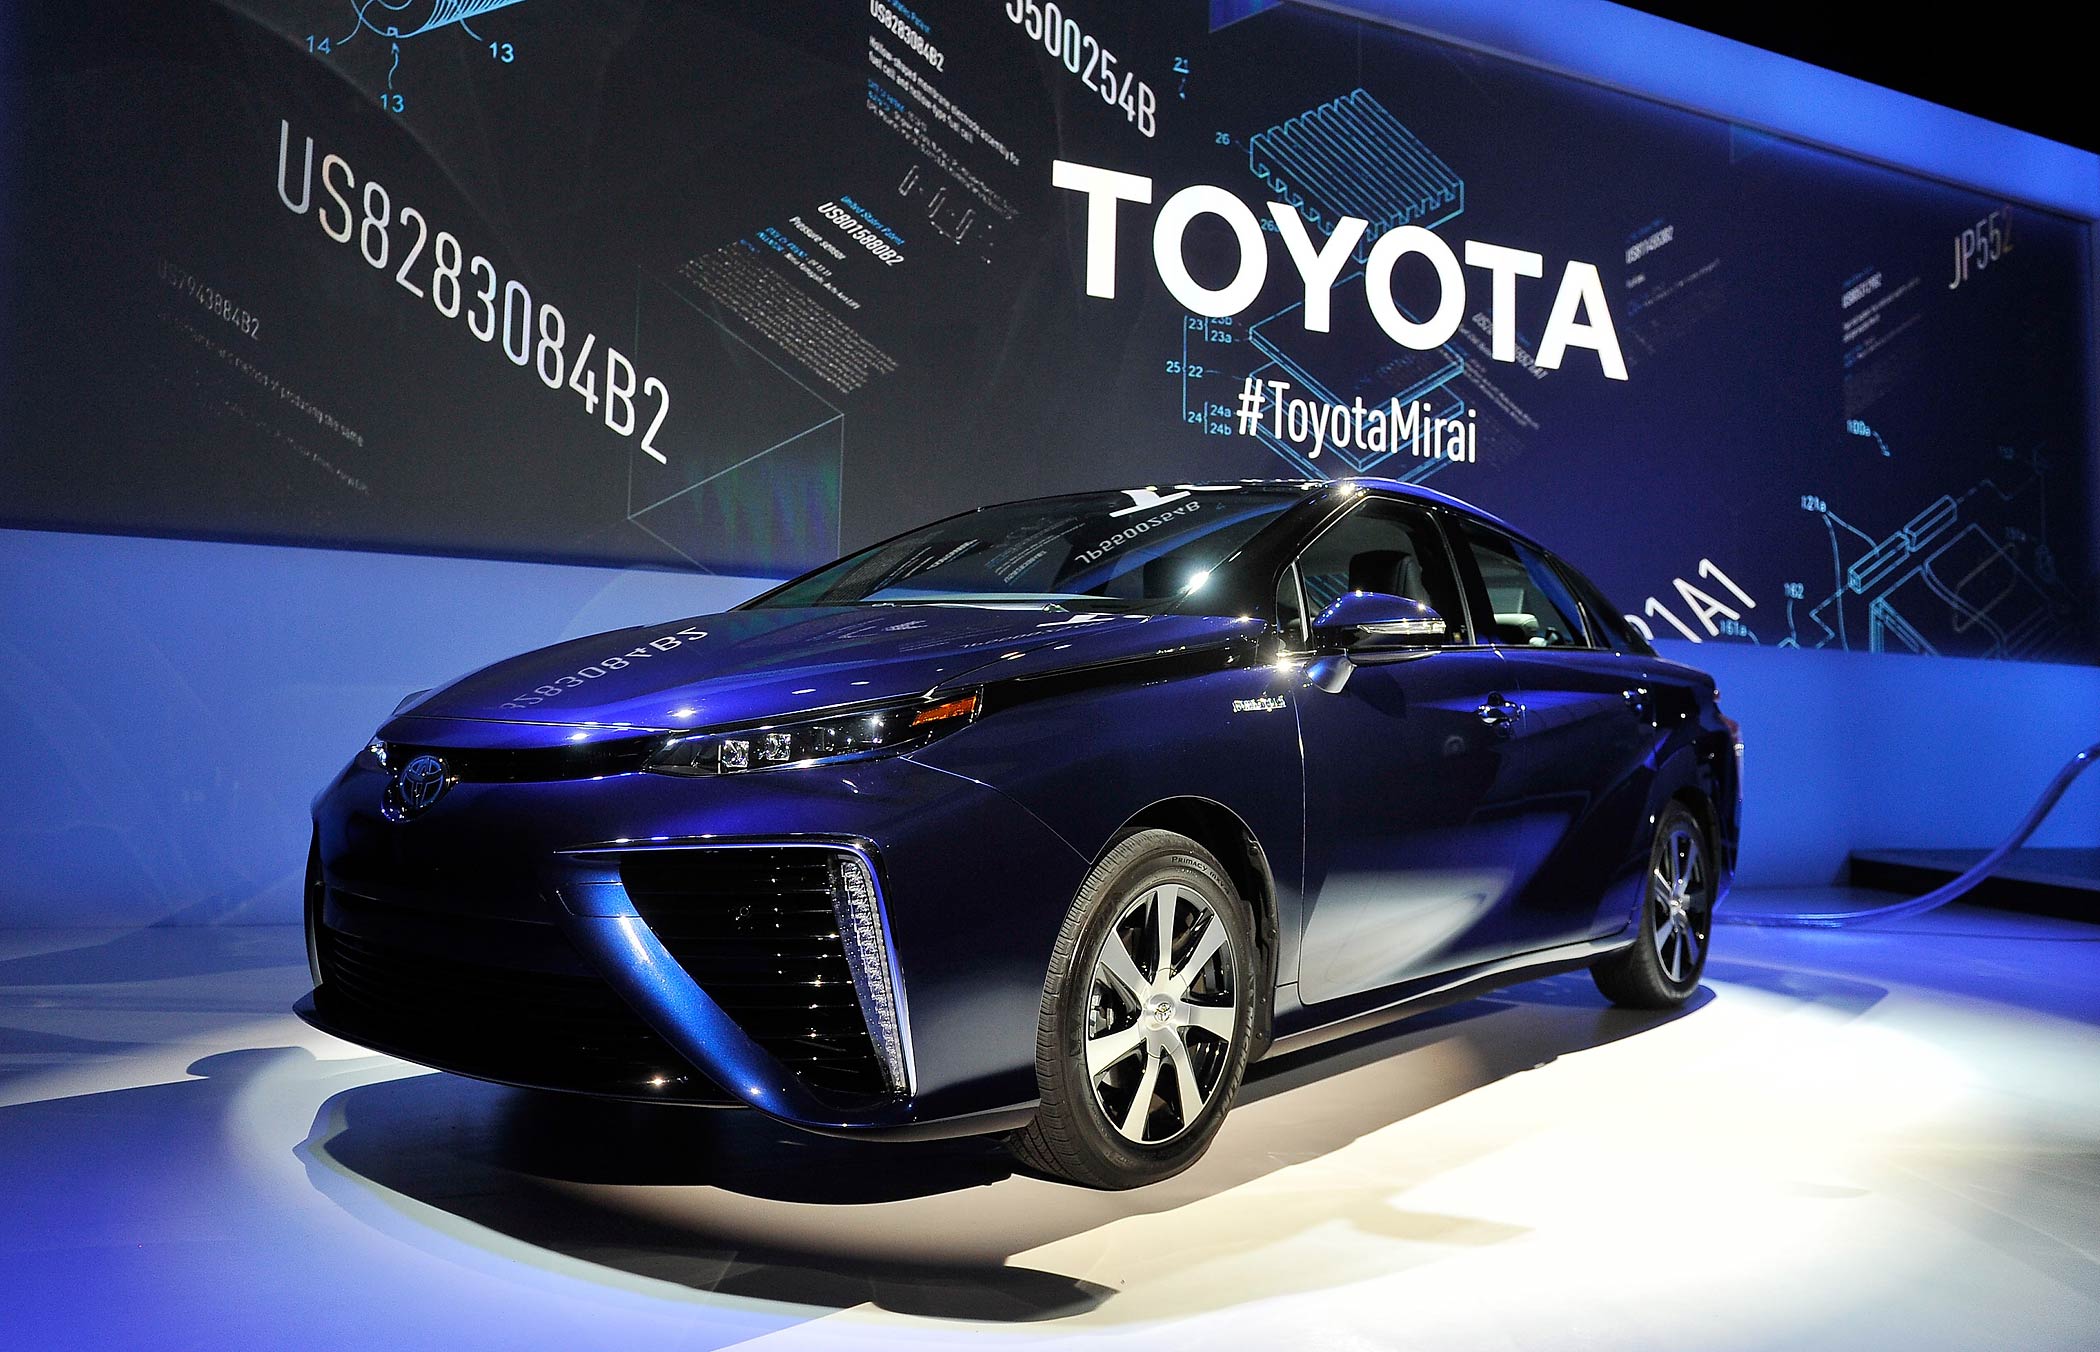 The Toyota Mirai is displayed at the 2015 International CES on January 5, 2015 in Las Vegas, Nevada. (David Becker—Getty Images)